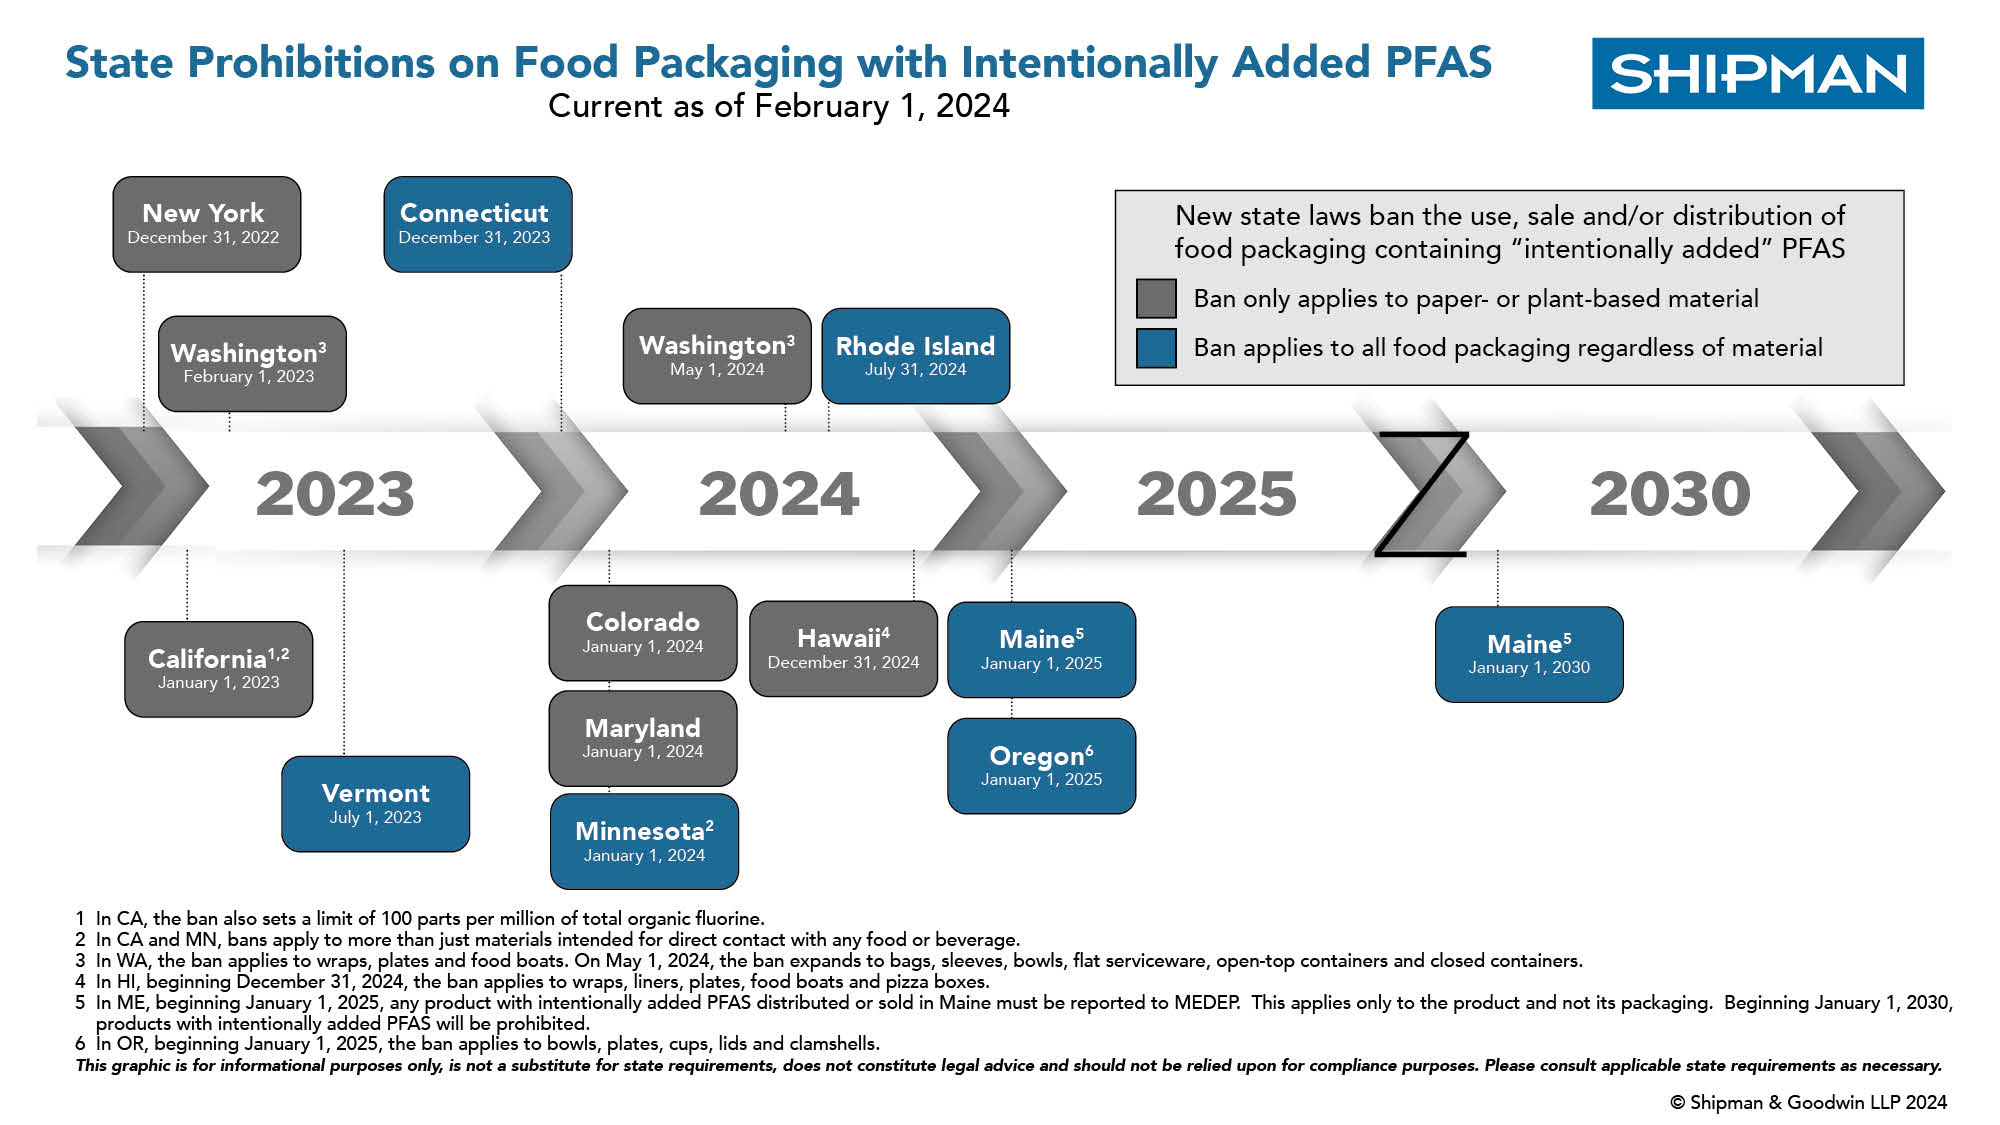 Timeline graphic showing upcoming state prohibitions on PFAS in food packaging